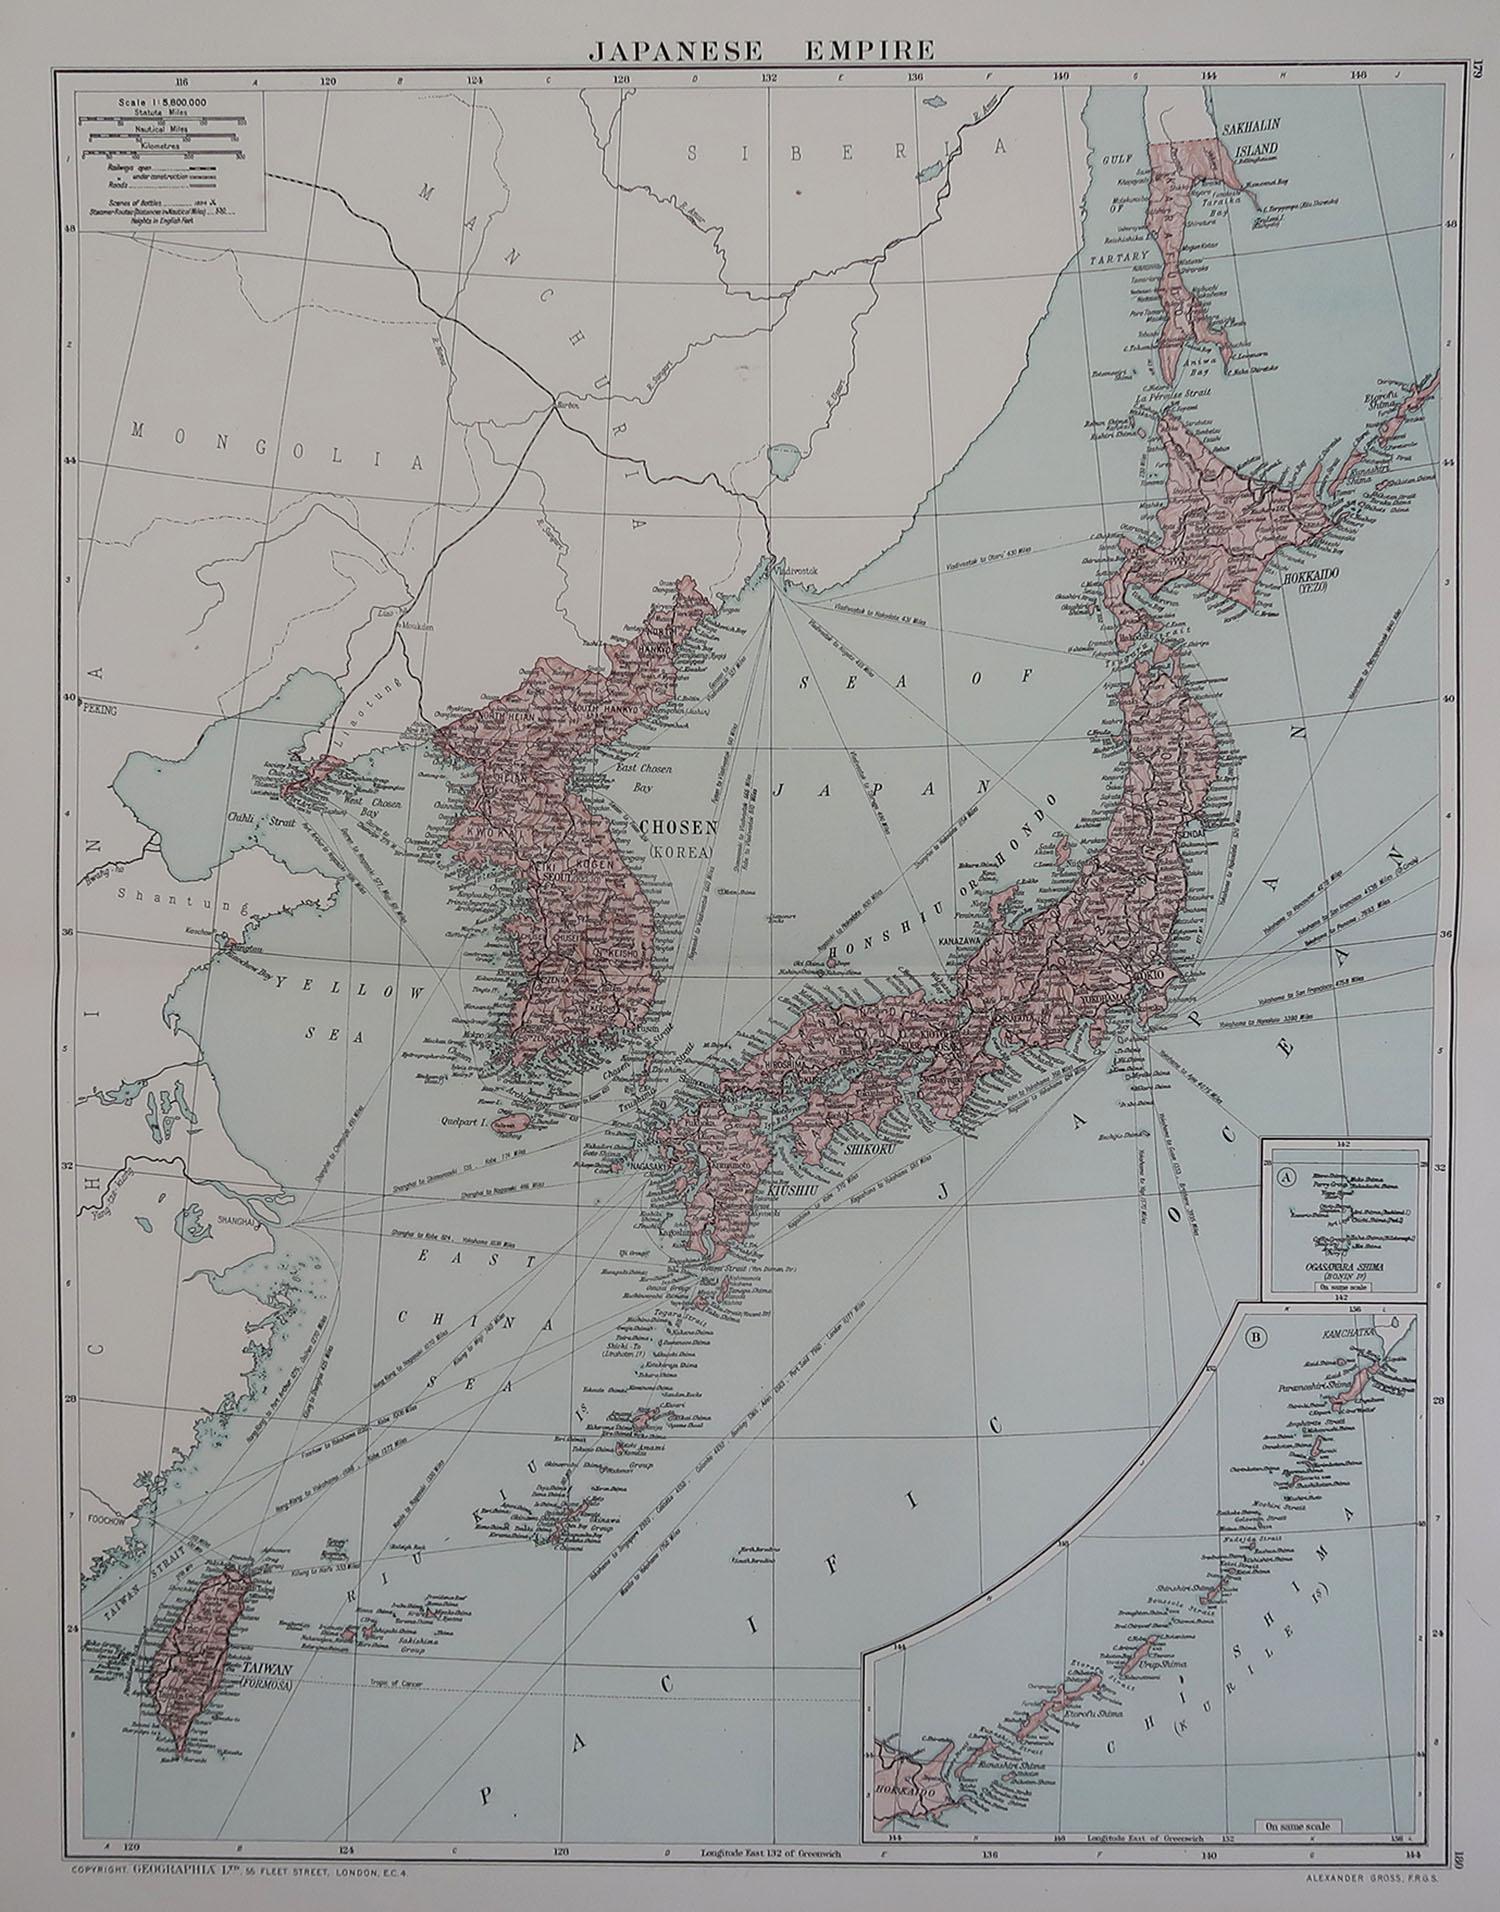 Great map of Japan

Original color. Good condition

Published by Alexander Gross

Unframed.










